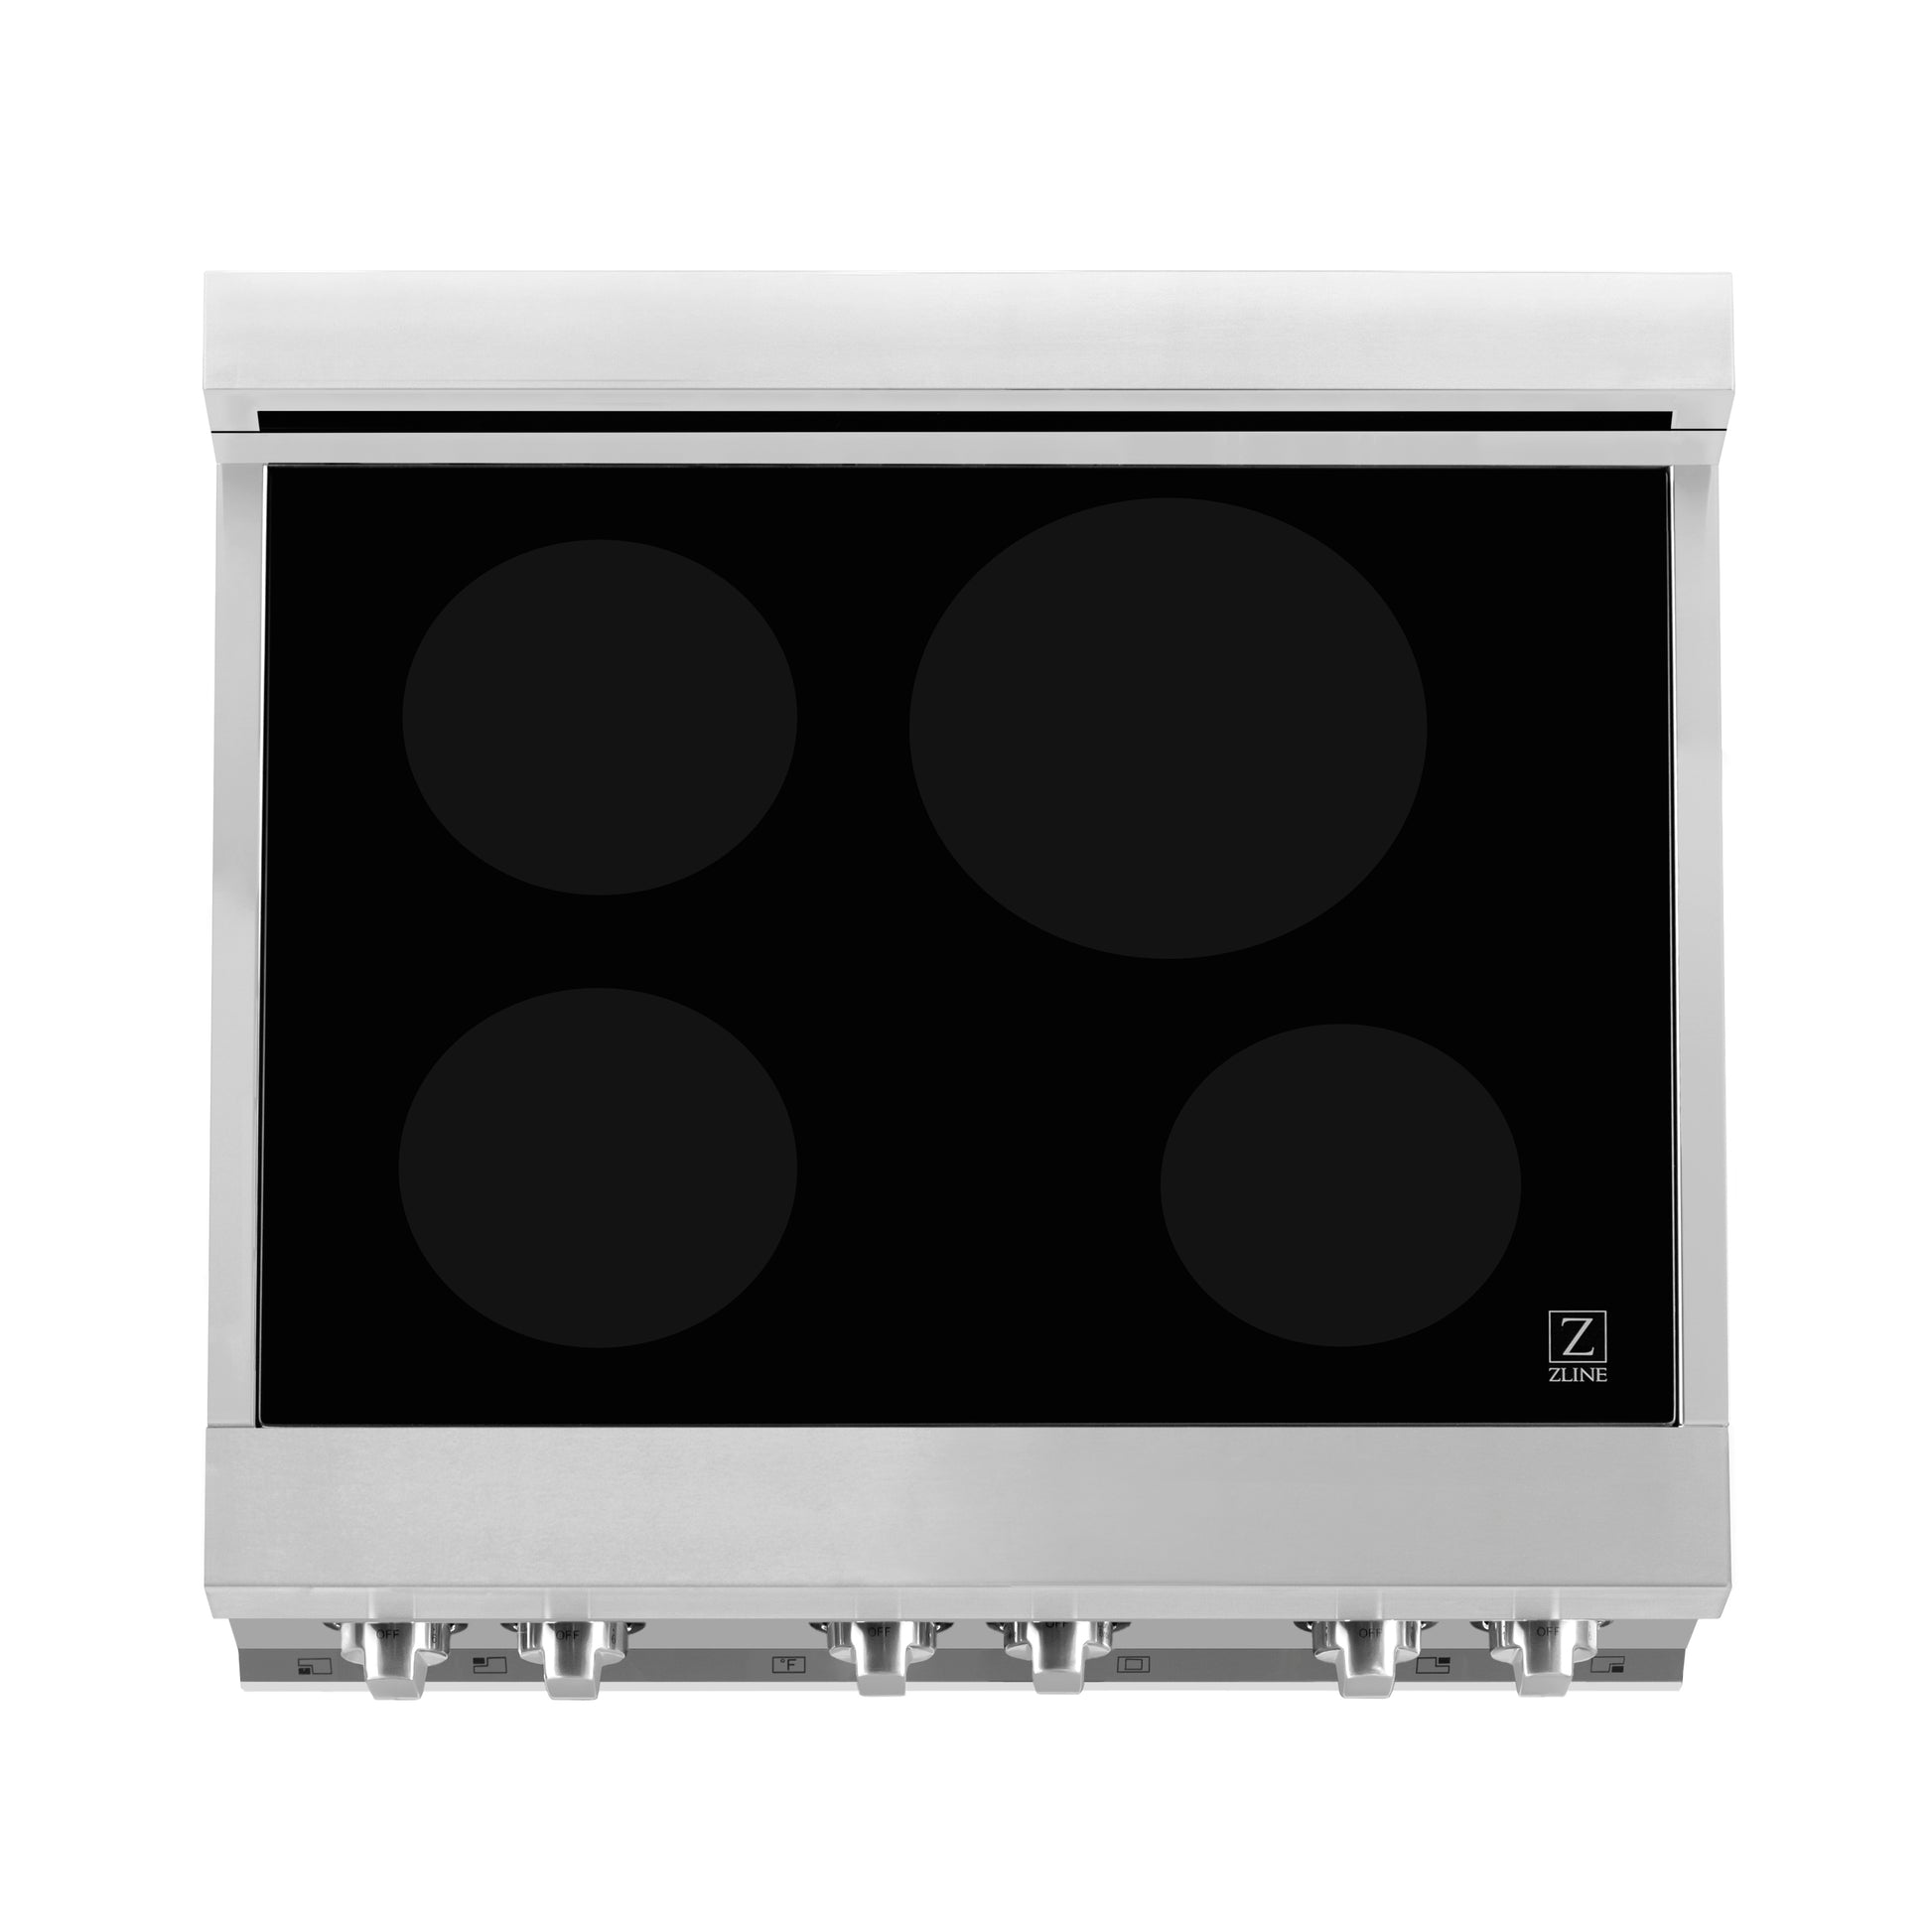 ZLINE 30 in. 4.0 cu. ft. Induction Range with a 4 Induction Element Stove and Electric Oven in Stainless Steel with Black Matte Door (RAIND-BLM-30) from above showing induction cooking elements on cooktop.